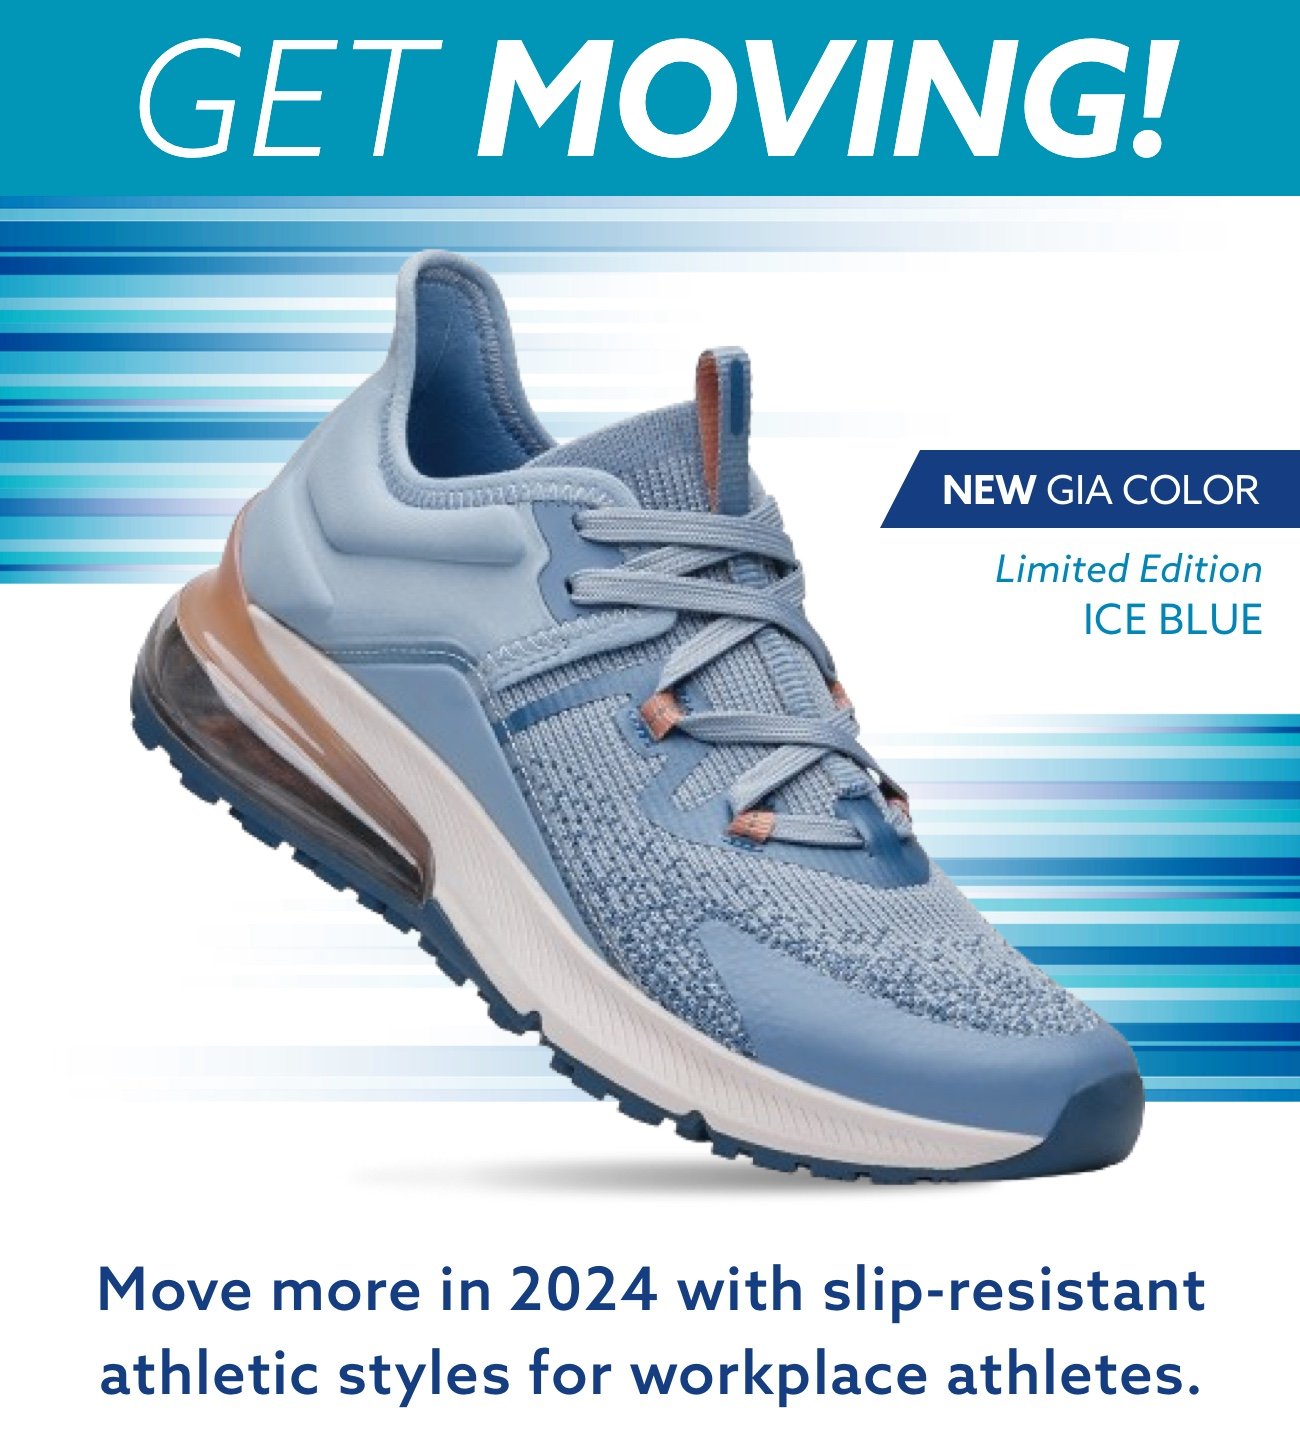 Get Moving - New GIA Ice Blue for Women - SHOP ATHLETIC STYLES